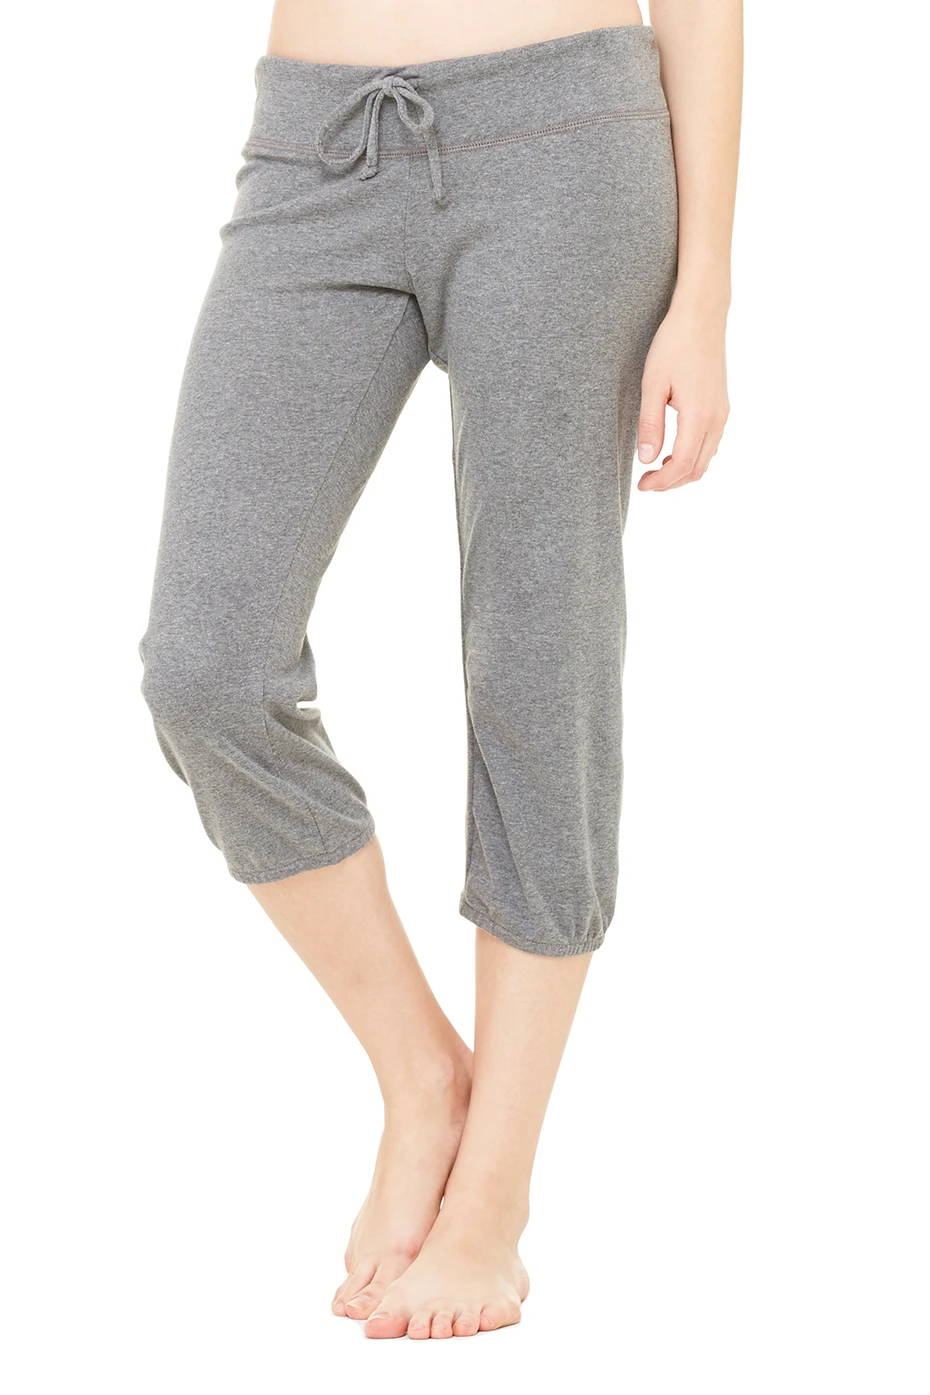 How To Take Care of Your Favorite Sweat Pants Joggers and Leggings